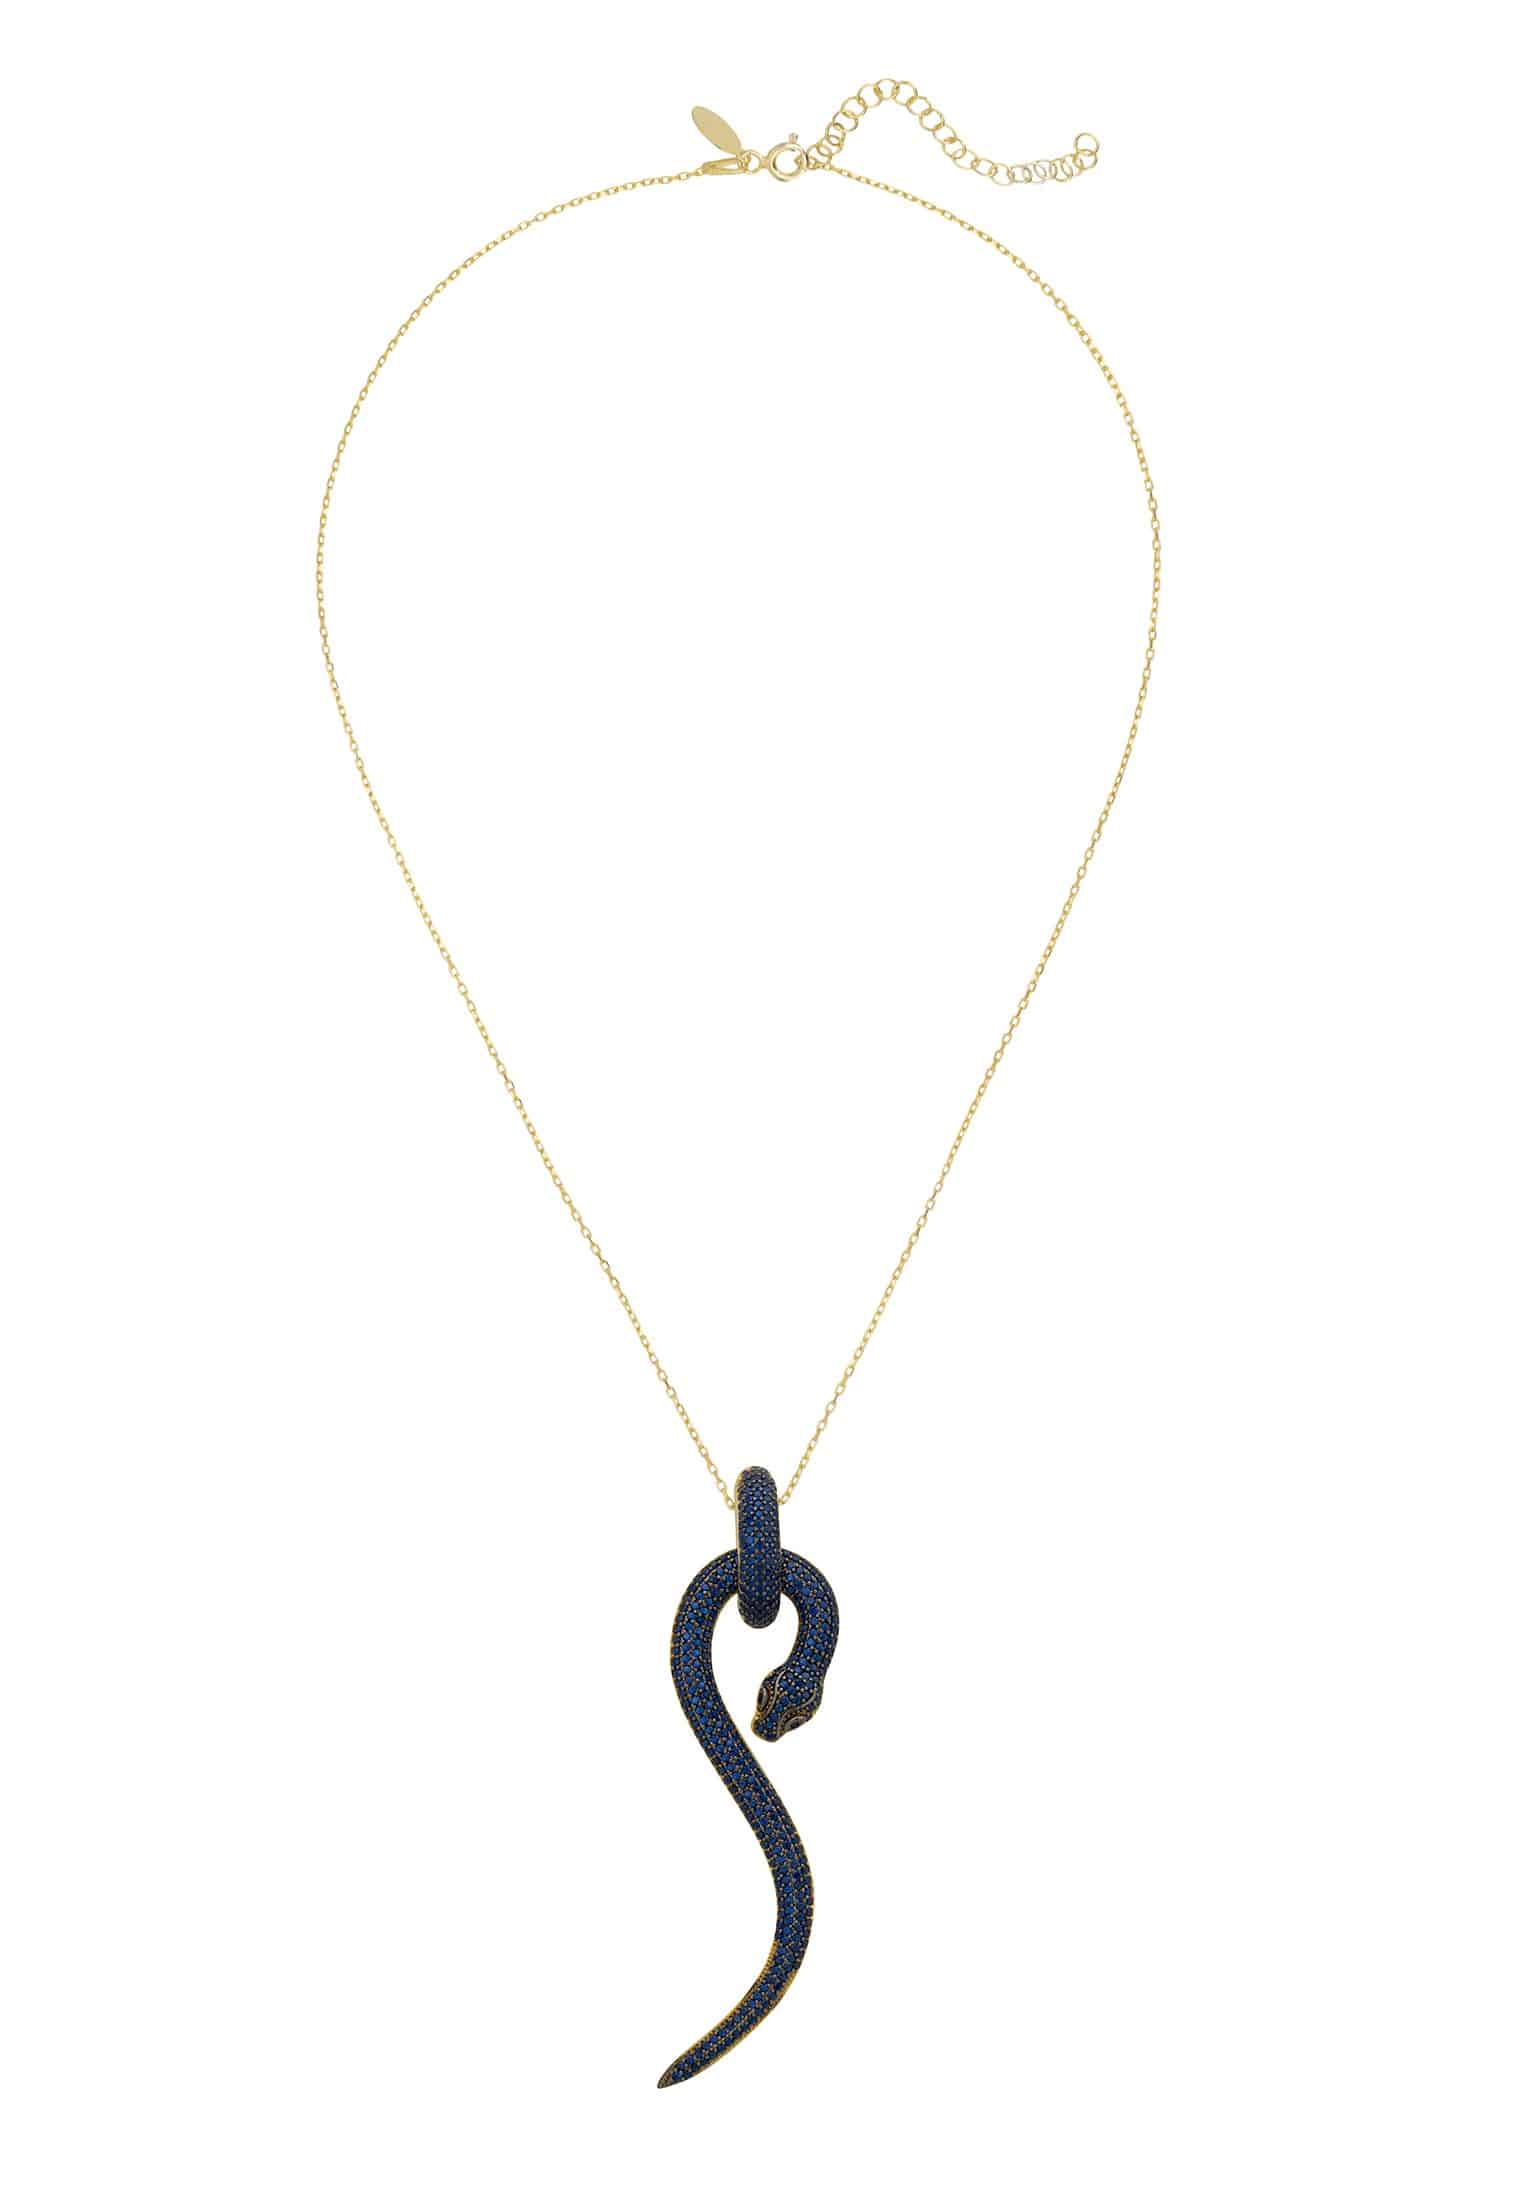 Gold Anaconda Snake Pendant Necklace with Sapphire Zircons - Animal Inspired Jewelry for Day and Night Bijou Her